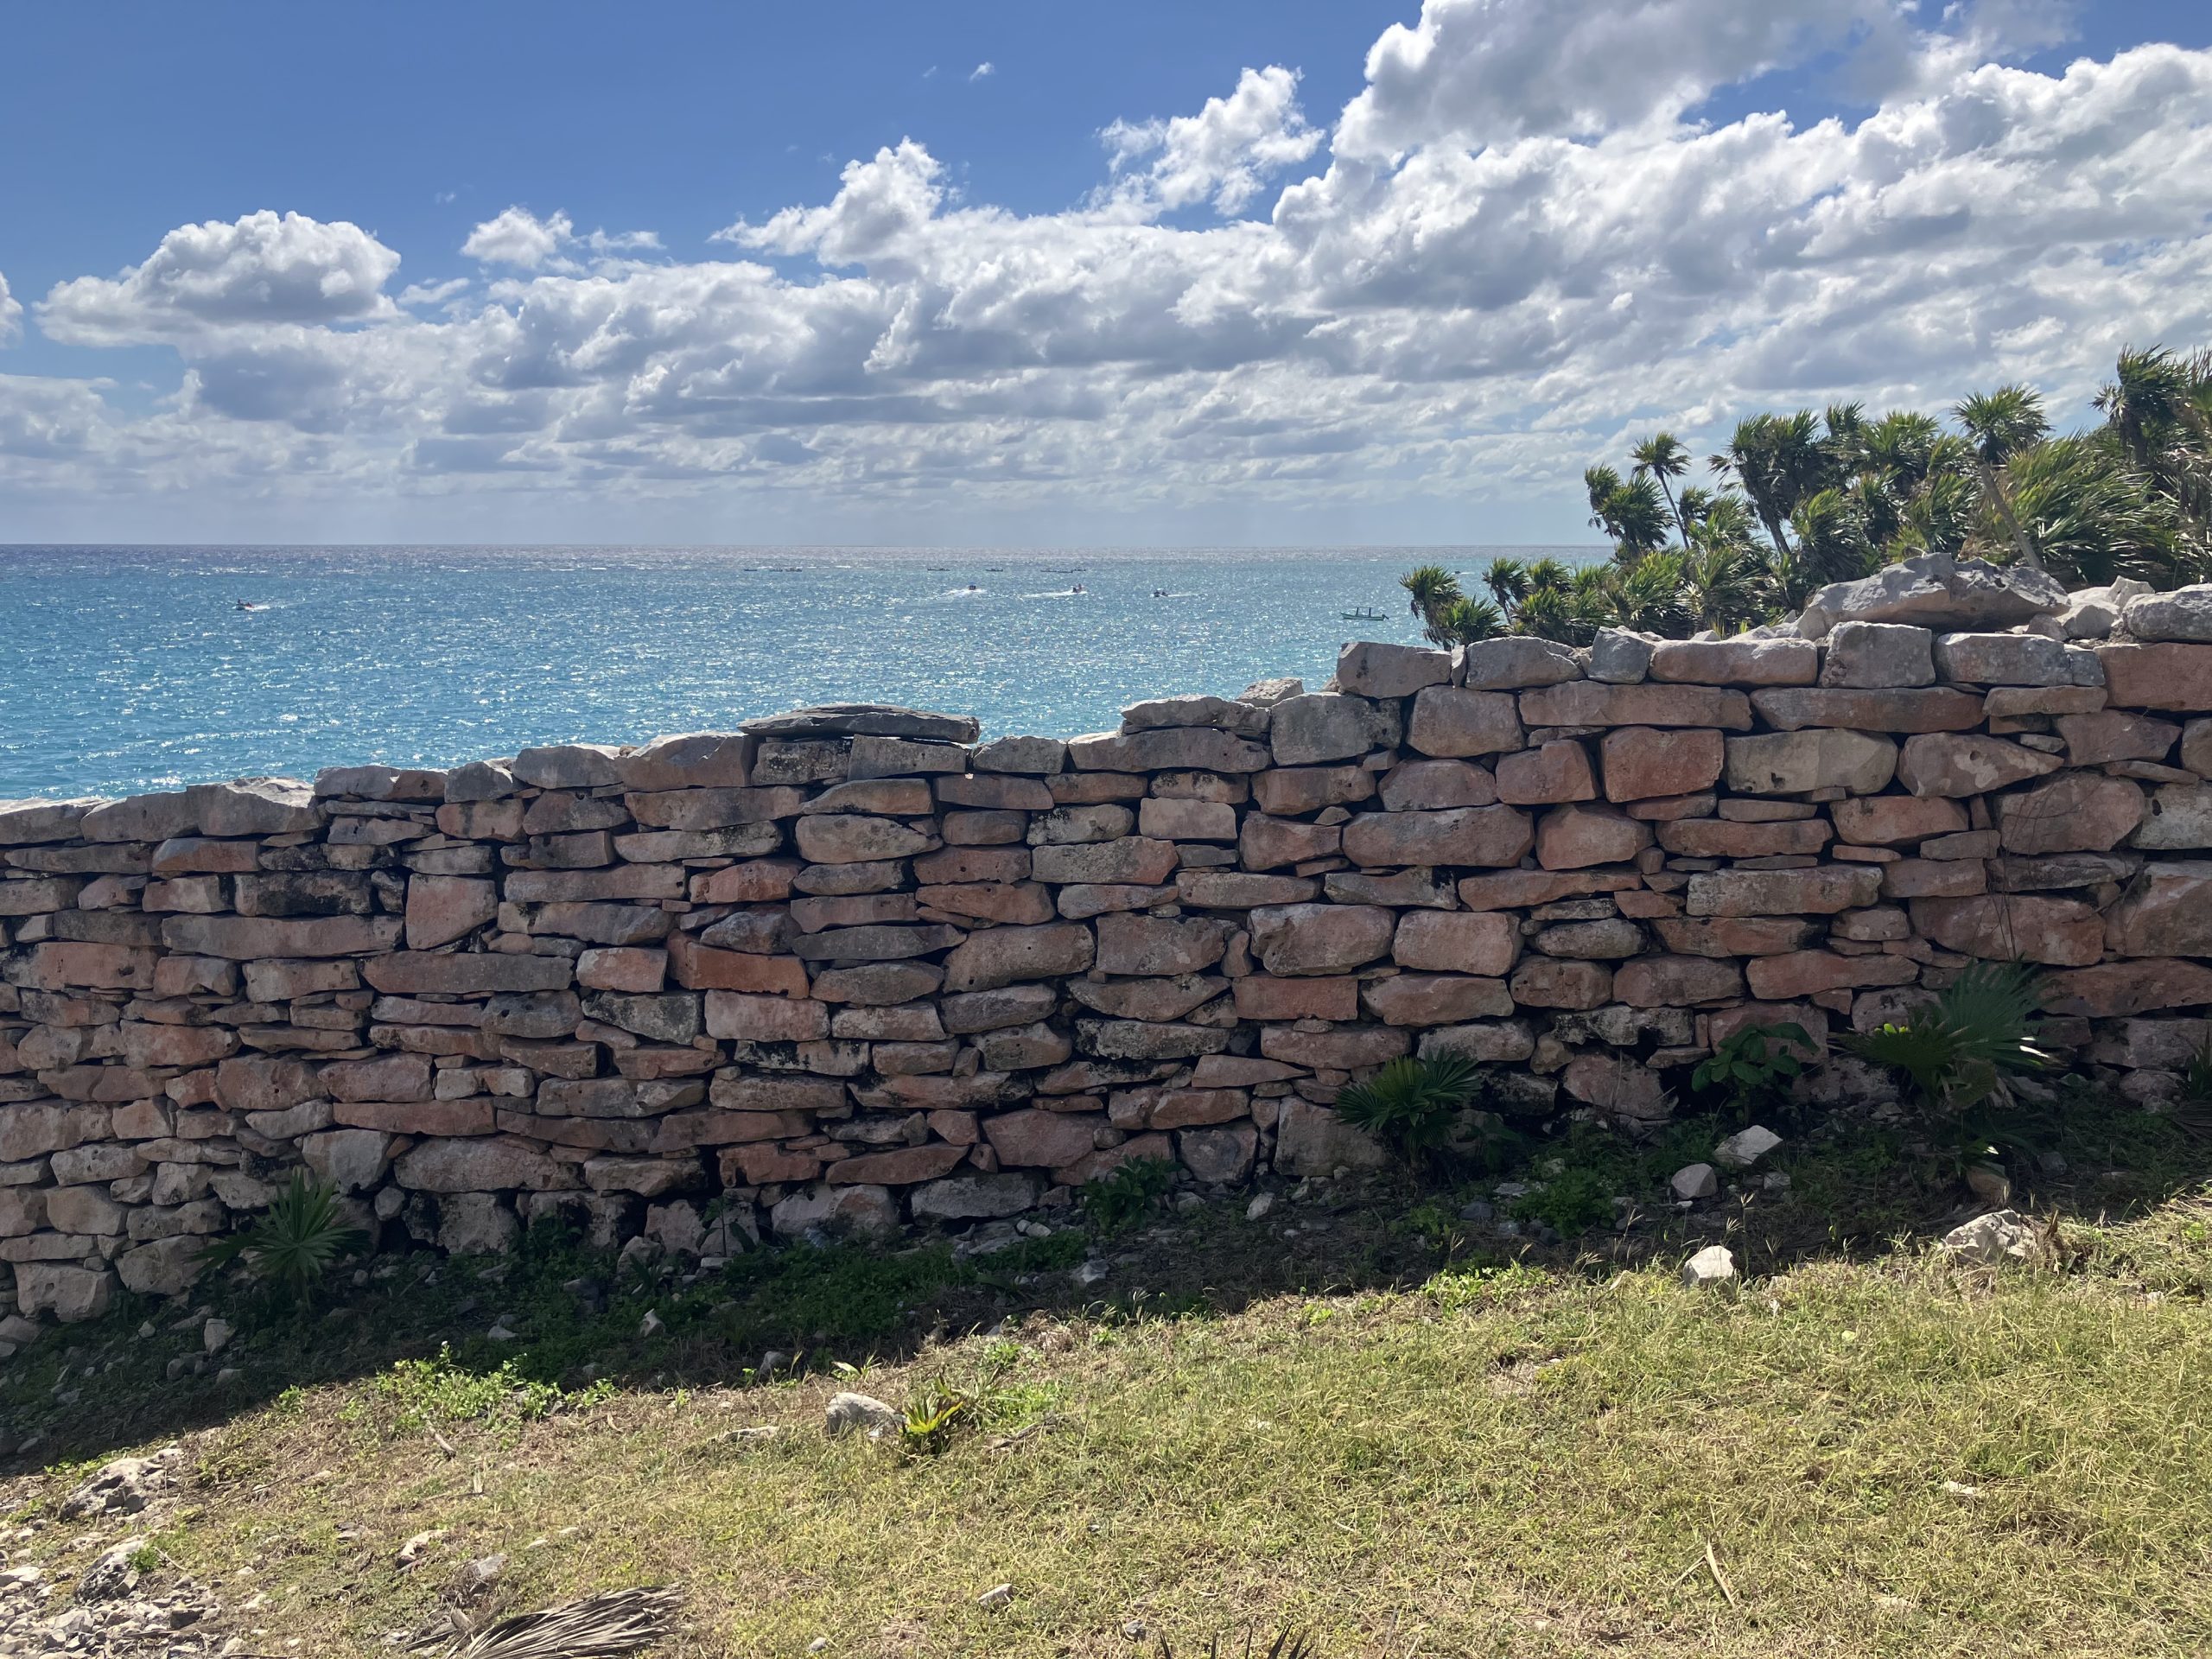 Part of the wall enclosing Tulum, looking over the Caribbean SeaEvidence of the blue and red paint that once covered the wall can still be seen on the limestone.